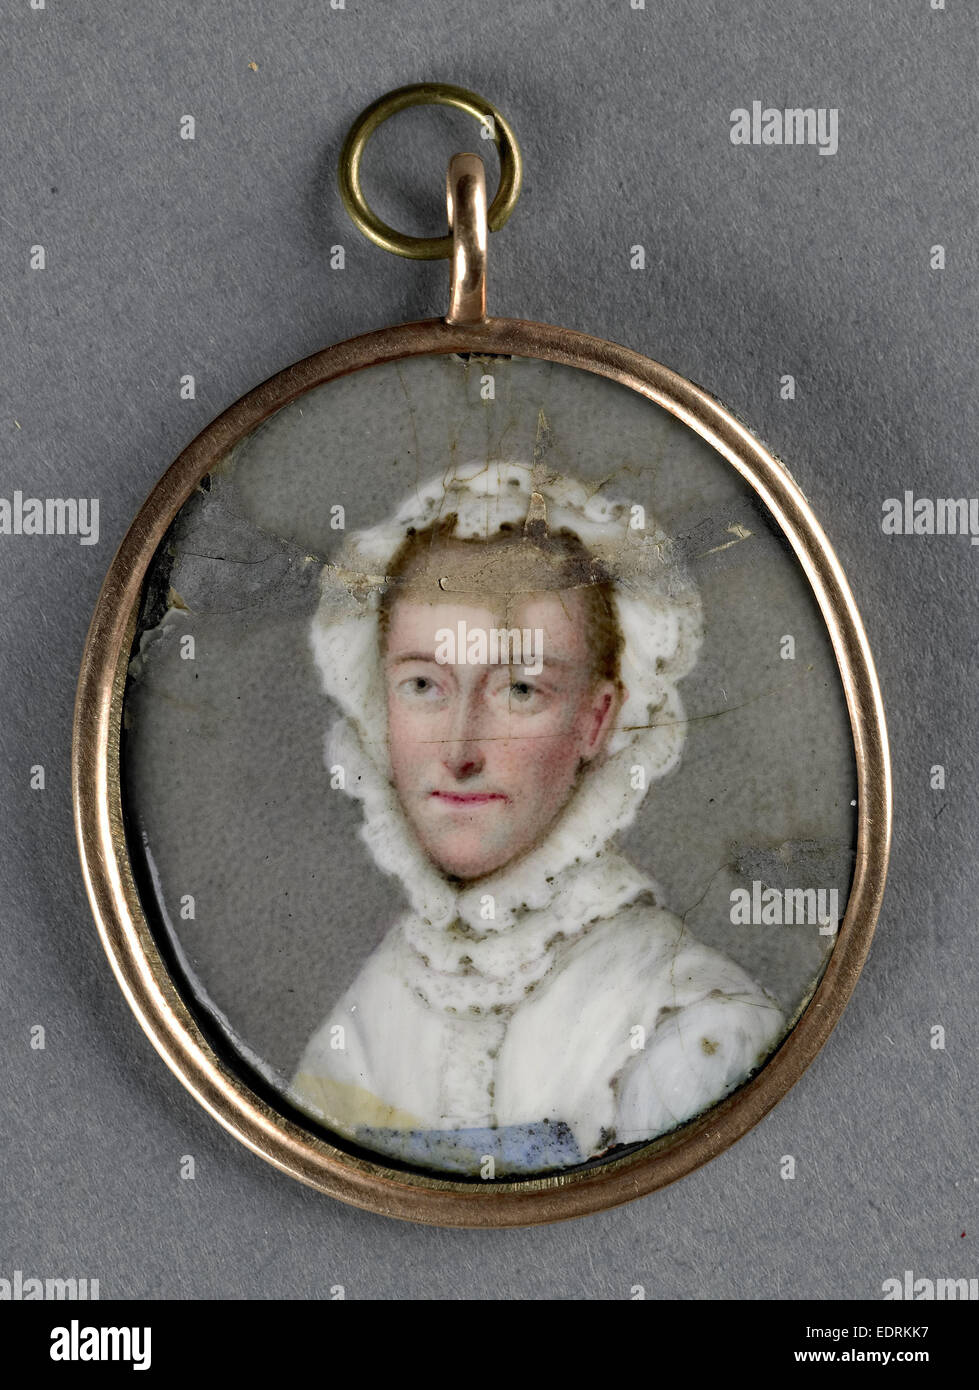 Mary of Hanover, 1722-72, Wife of Frederick, Landgrave of Hesse-Cassel, Anonymous, 1740 - 1770, Portrait miniature Stock Photo